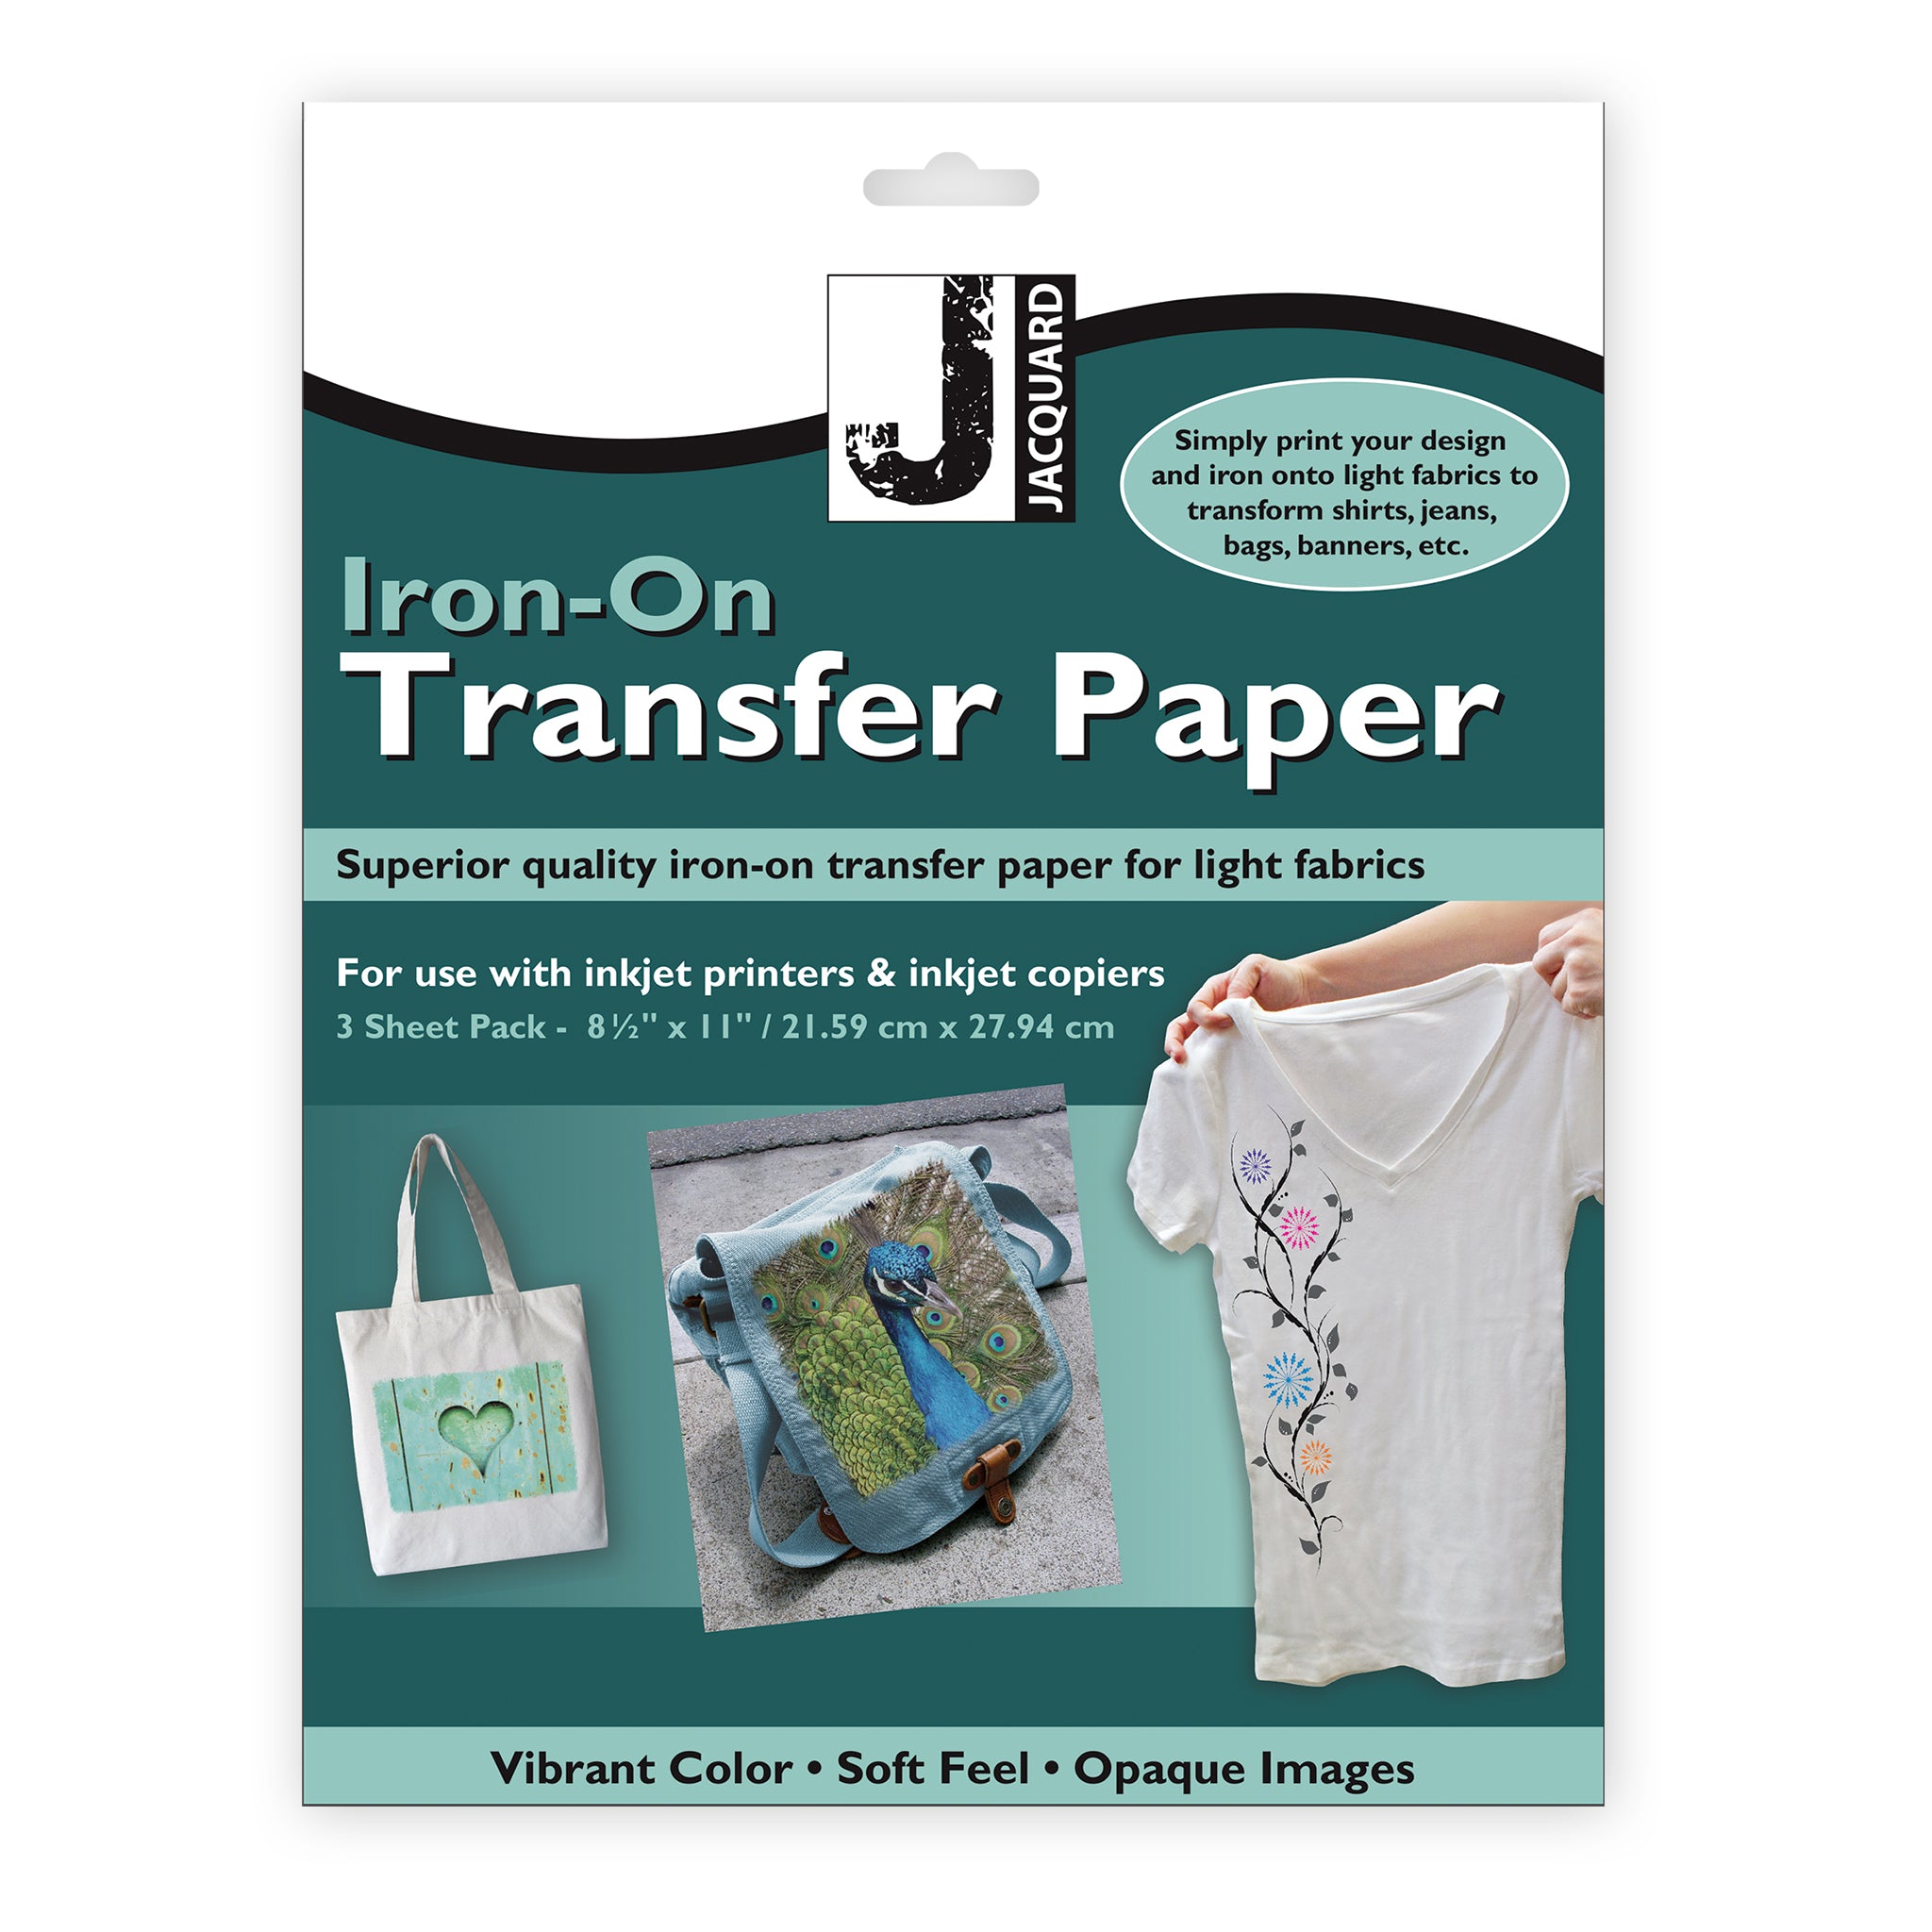 Iron-On Transfer Paper for Light Colored Fabrics